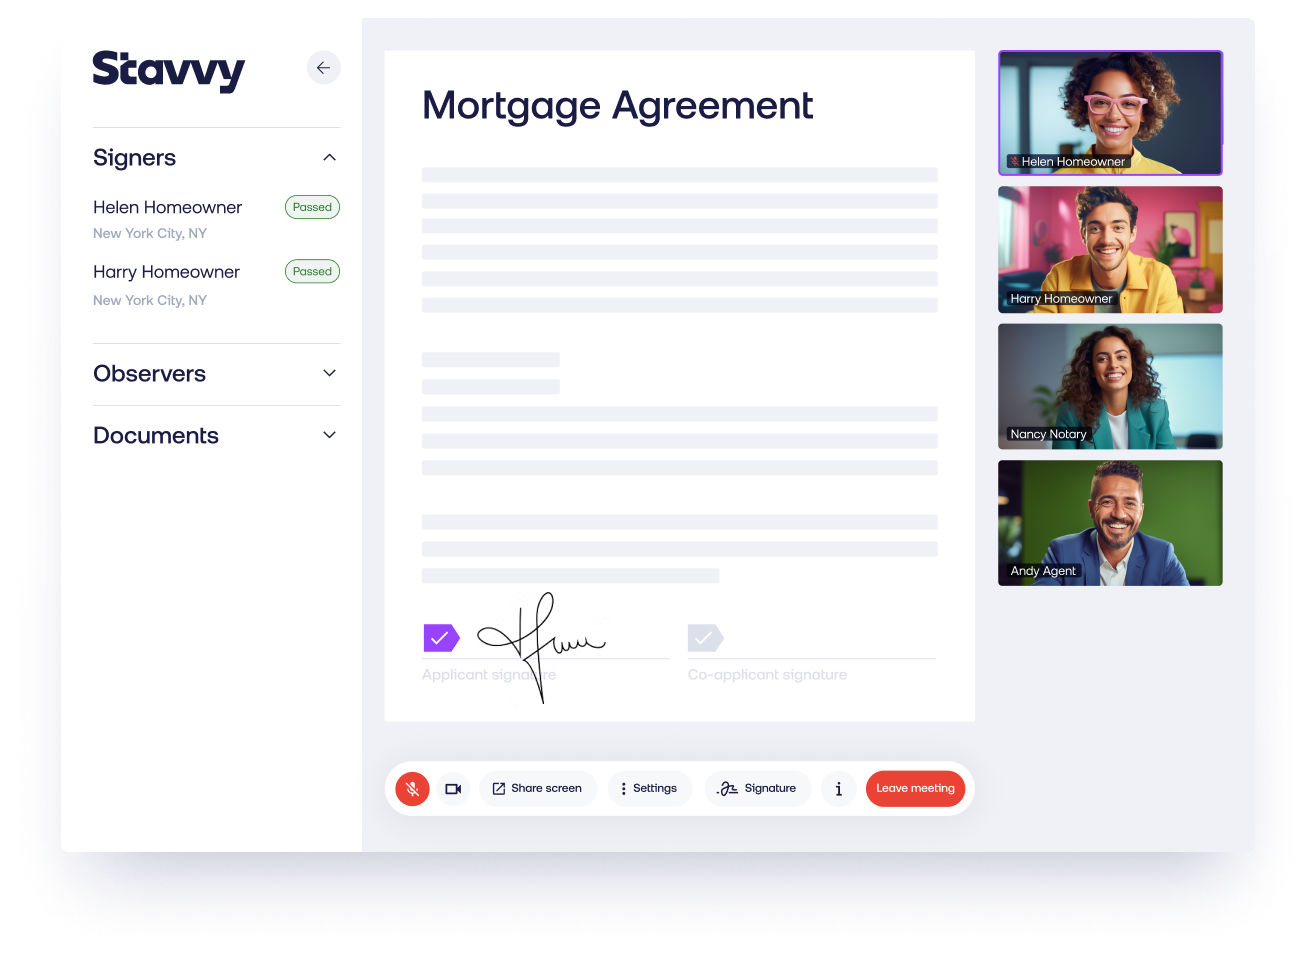 Illustration representing a mortgage signing on the Stavvy platform